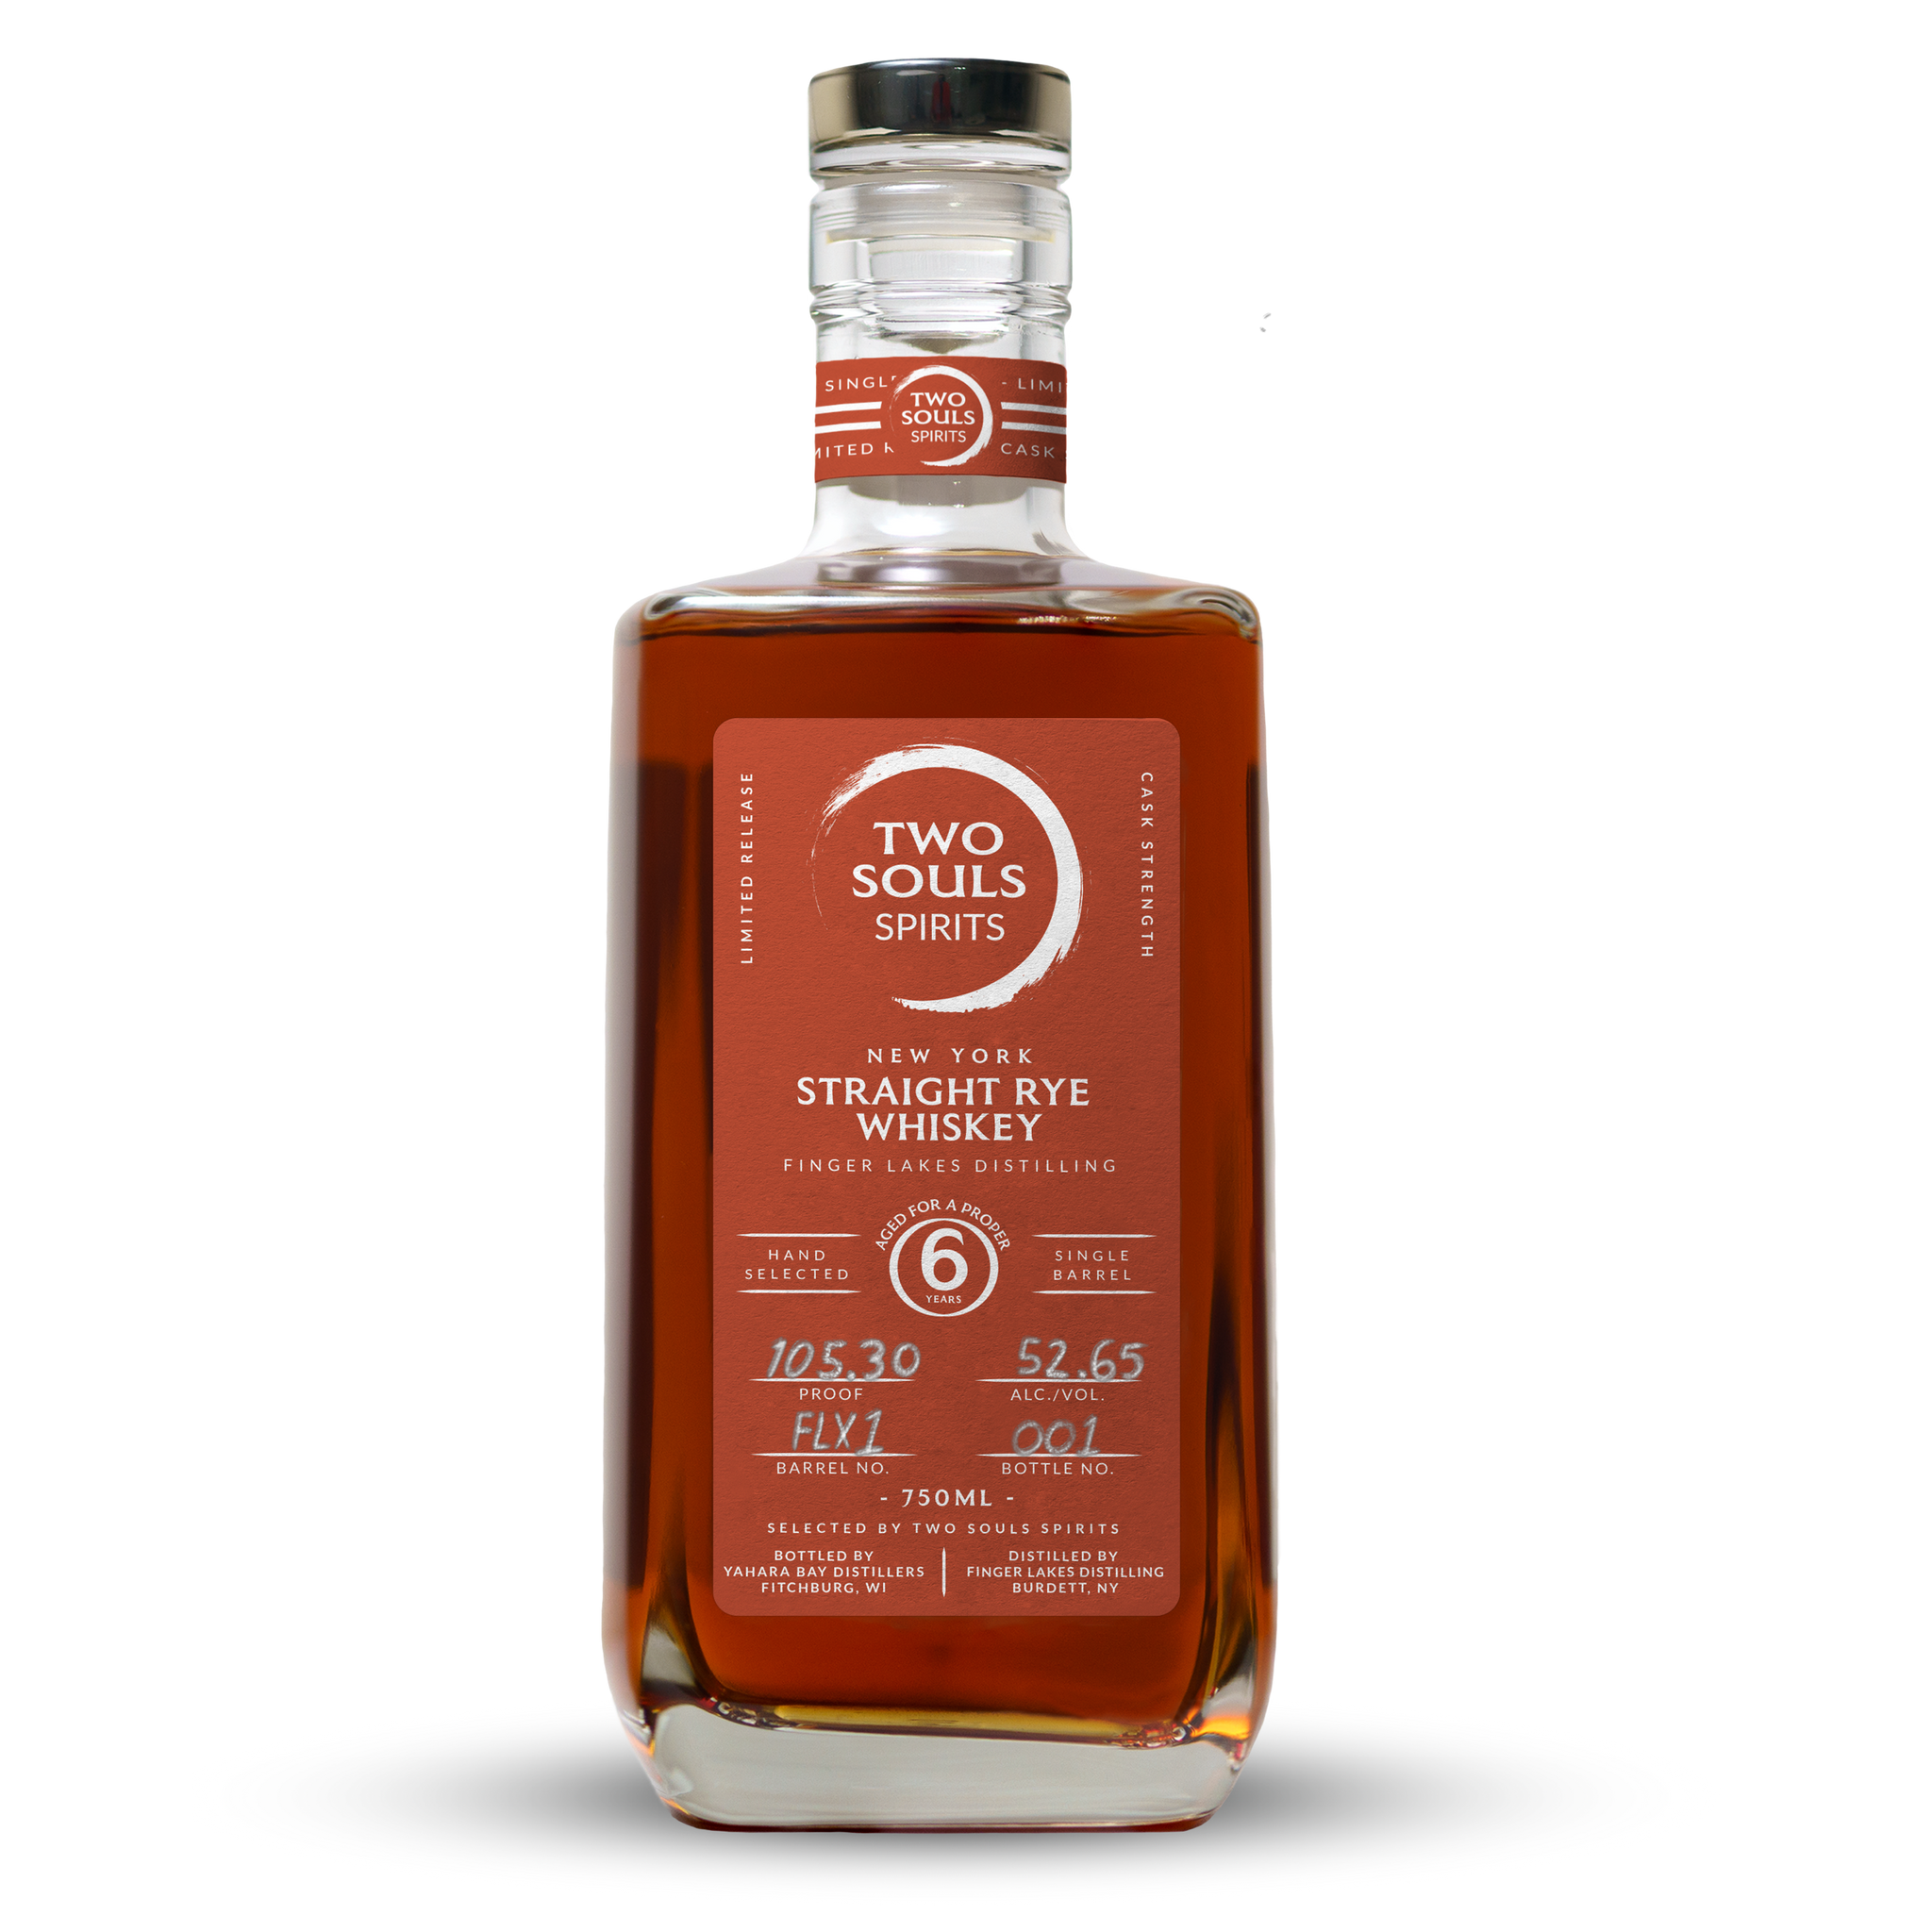 6-Year New York Straight Rye Whiskey Featuring Finger Lakes Distilling